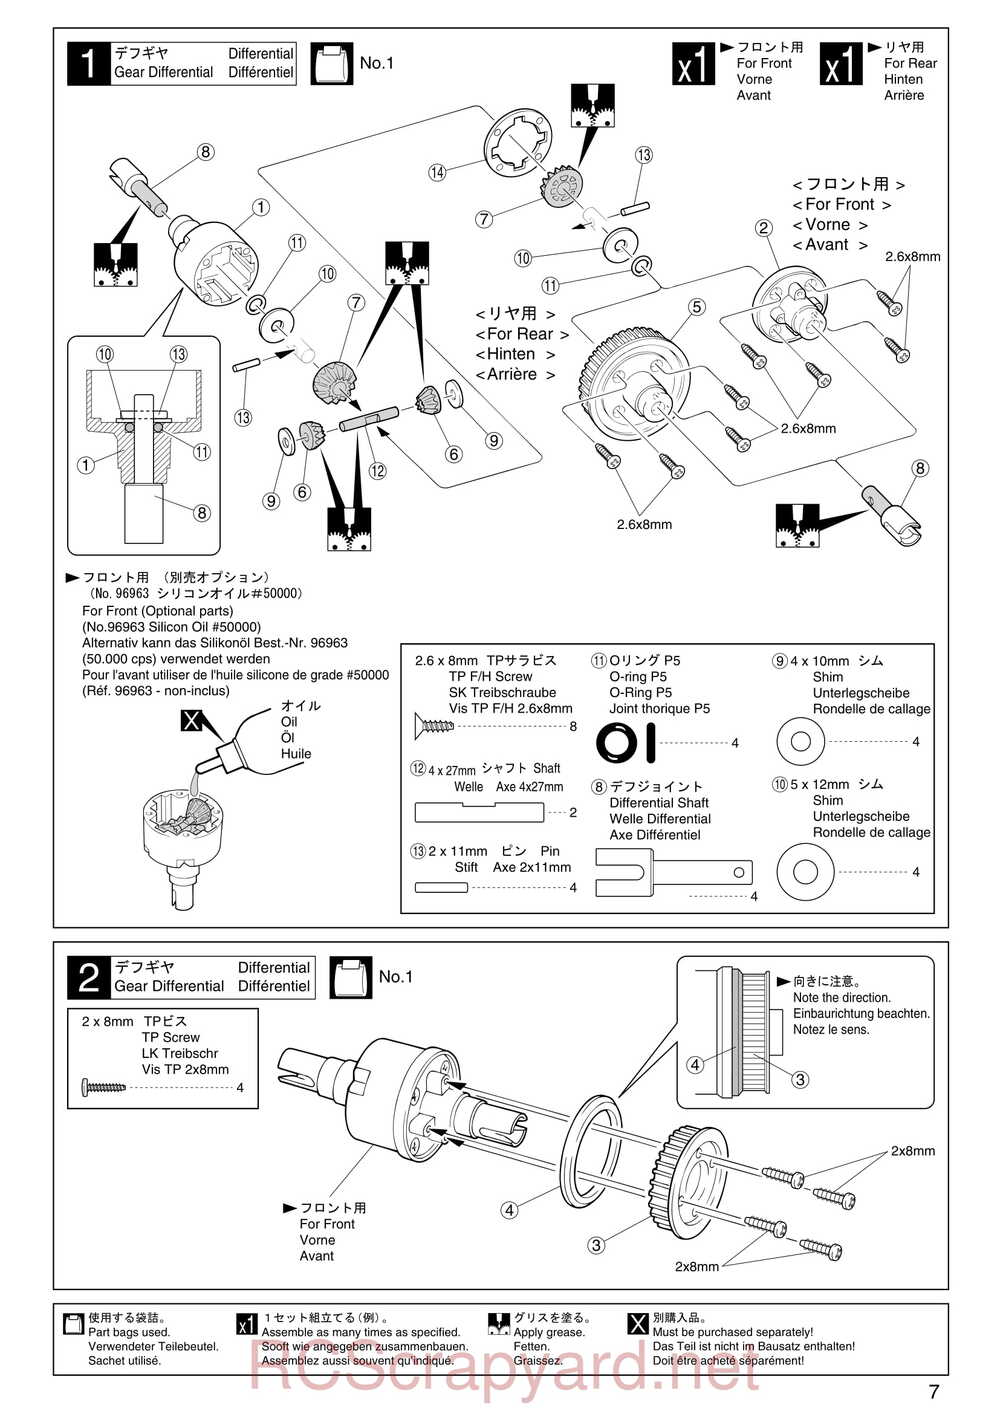 Kyosho - 31241 - V-One-S - Manual - Page 07